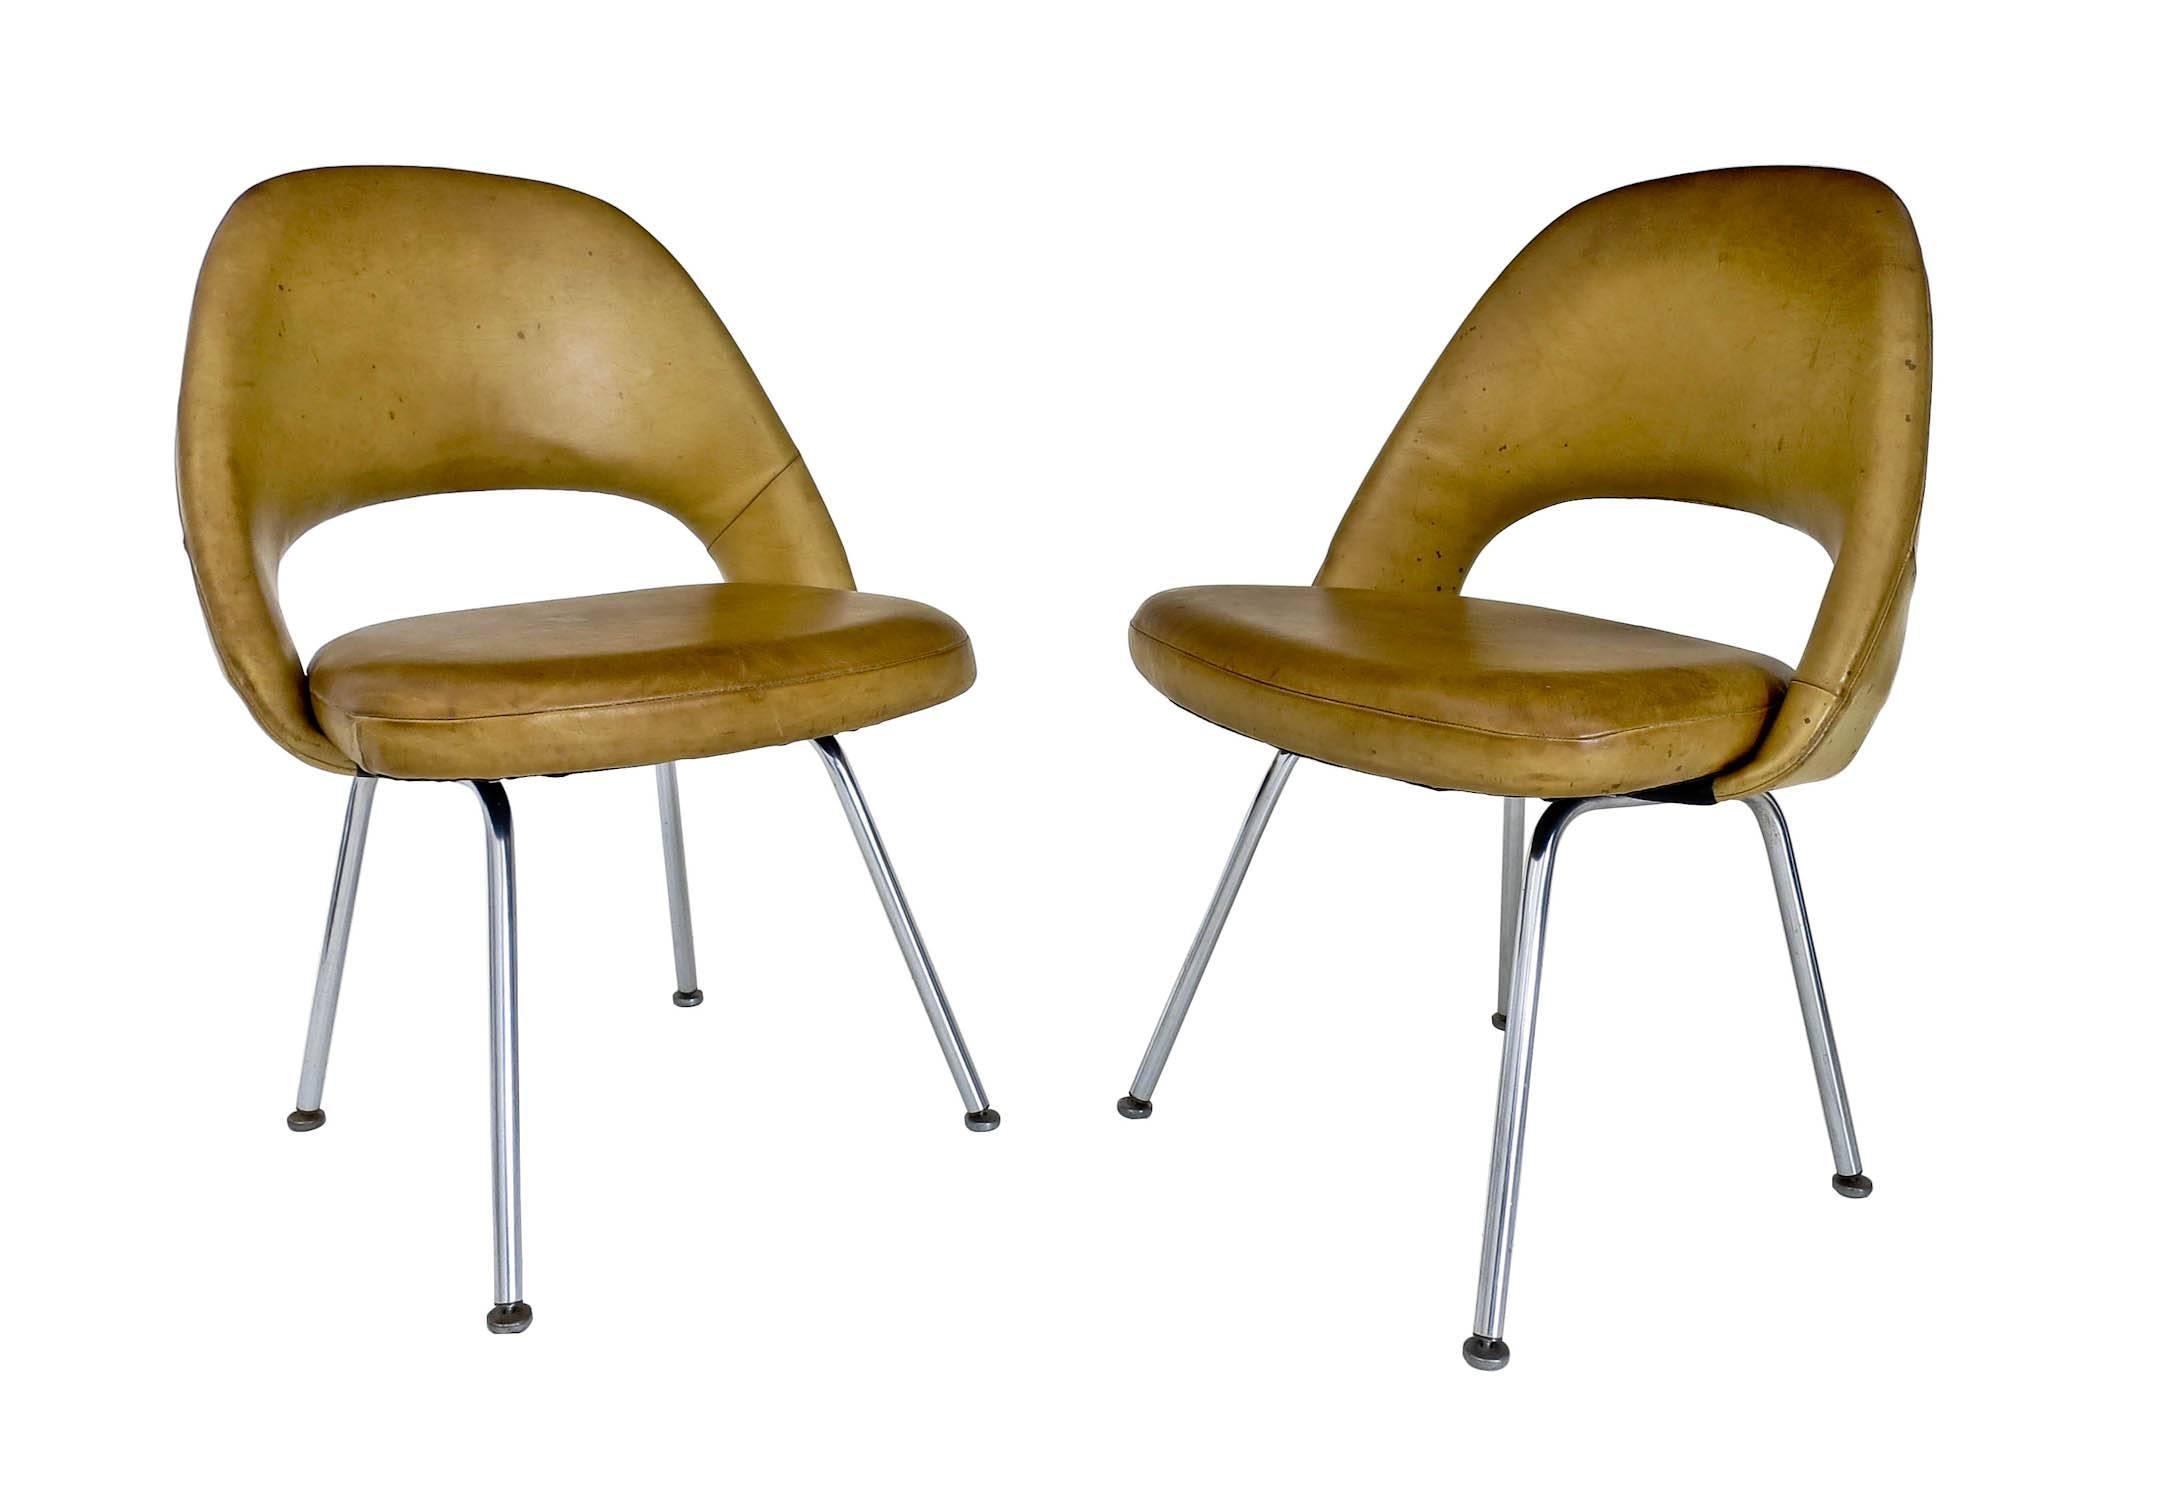 A rare pair of executive chairs designed by Eero Saarinen for Knoll International, in their original patinated leather.

Designed in 1950 these vintage chairs are very early examples, the leg configuration on the underside is a rare one, most have